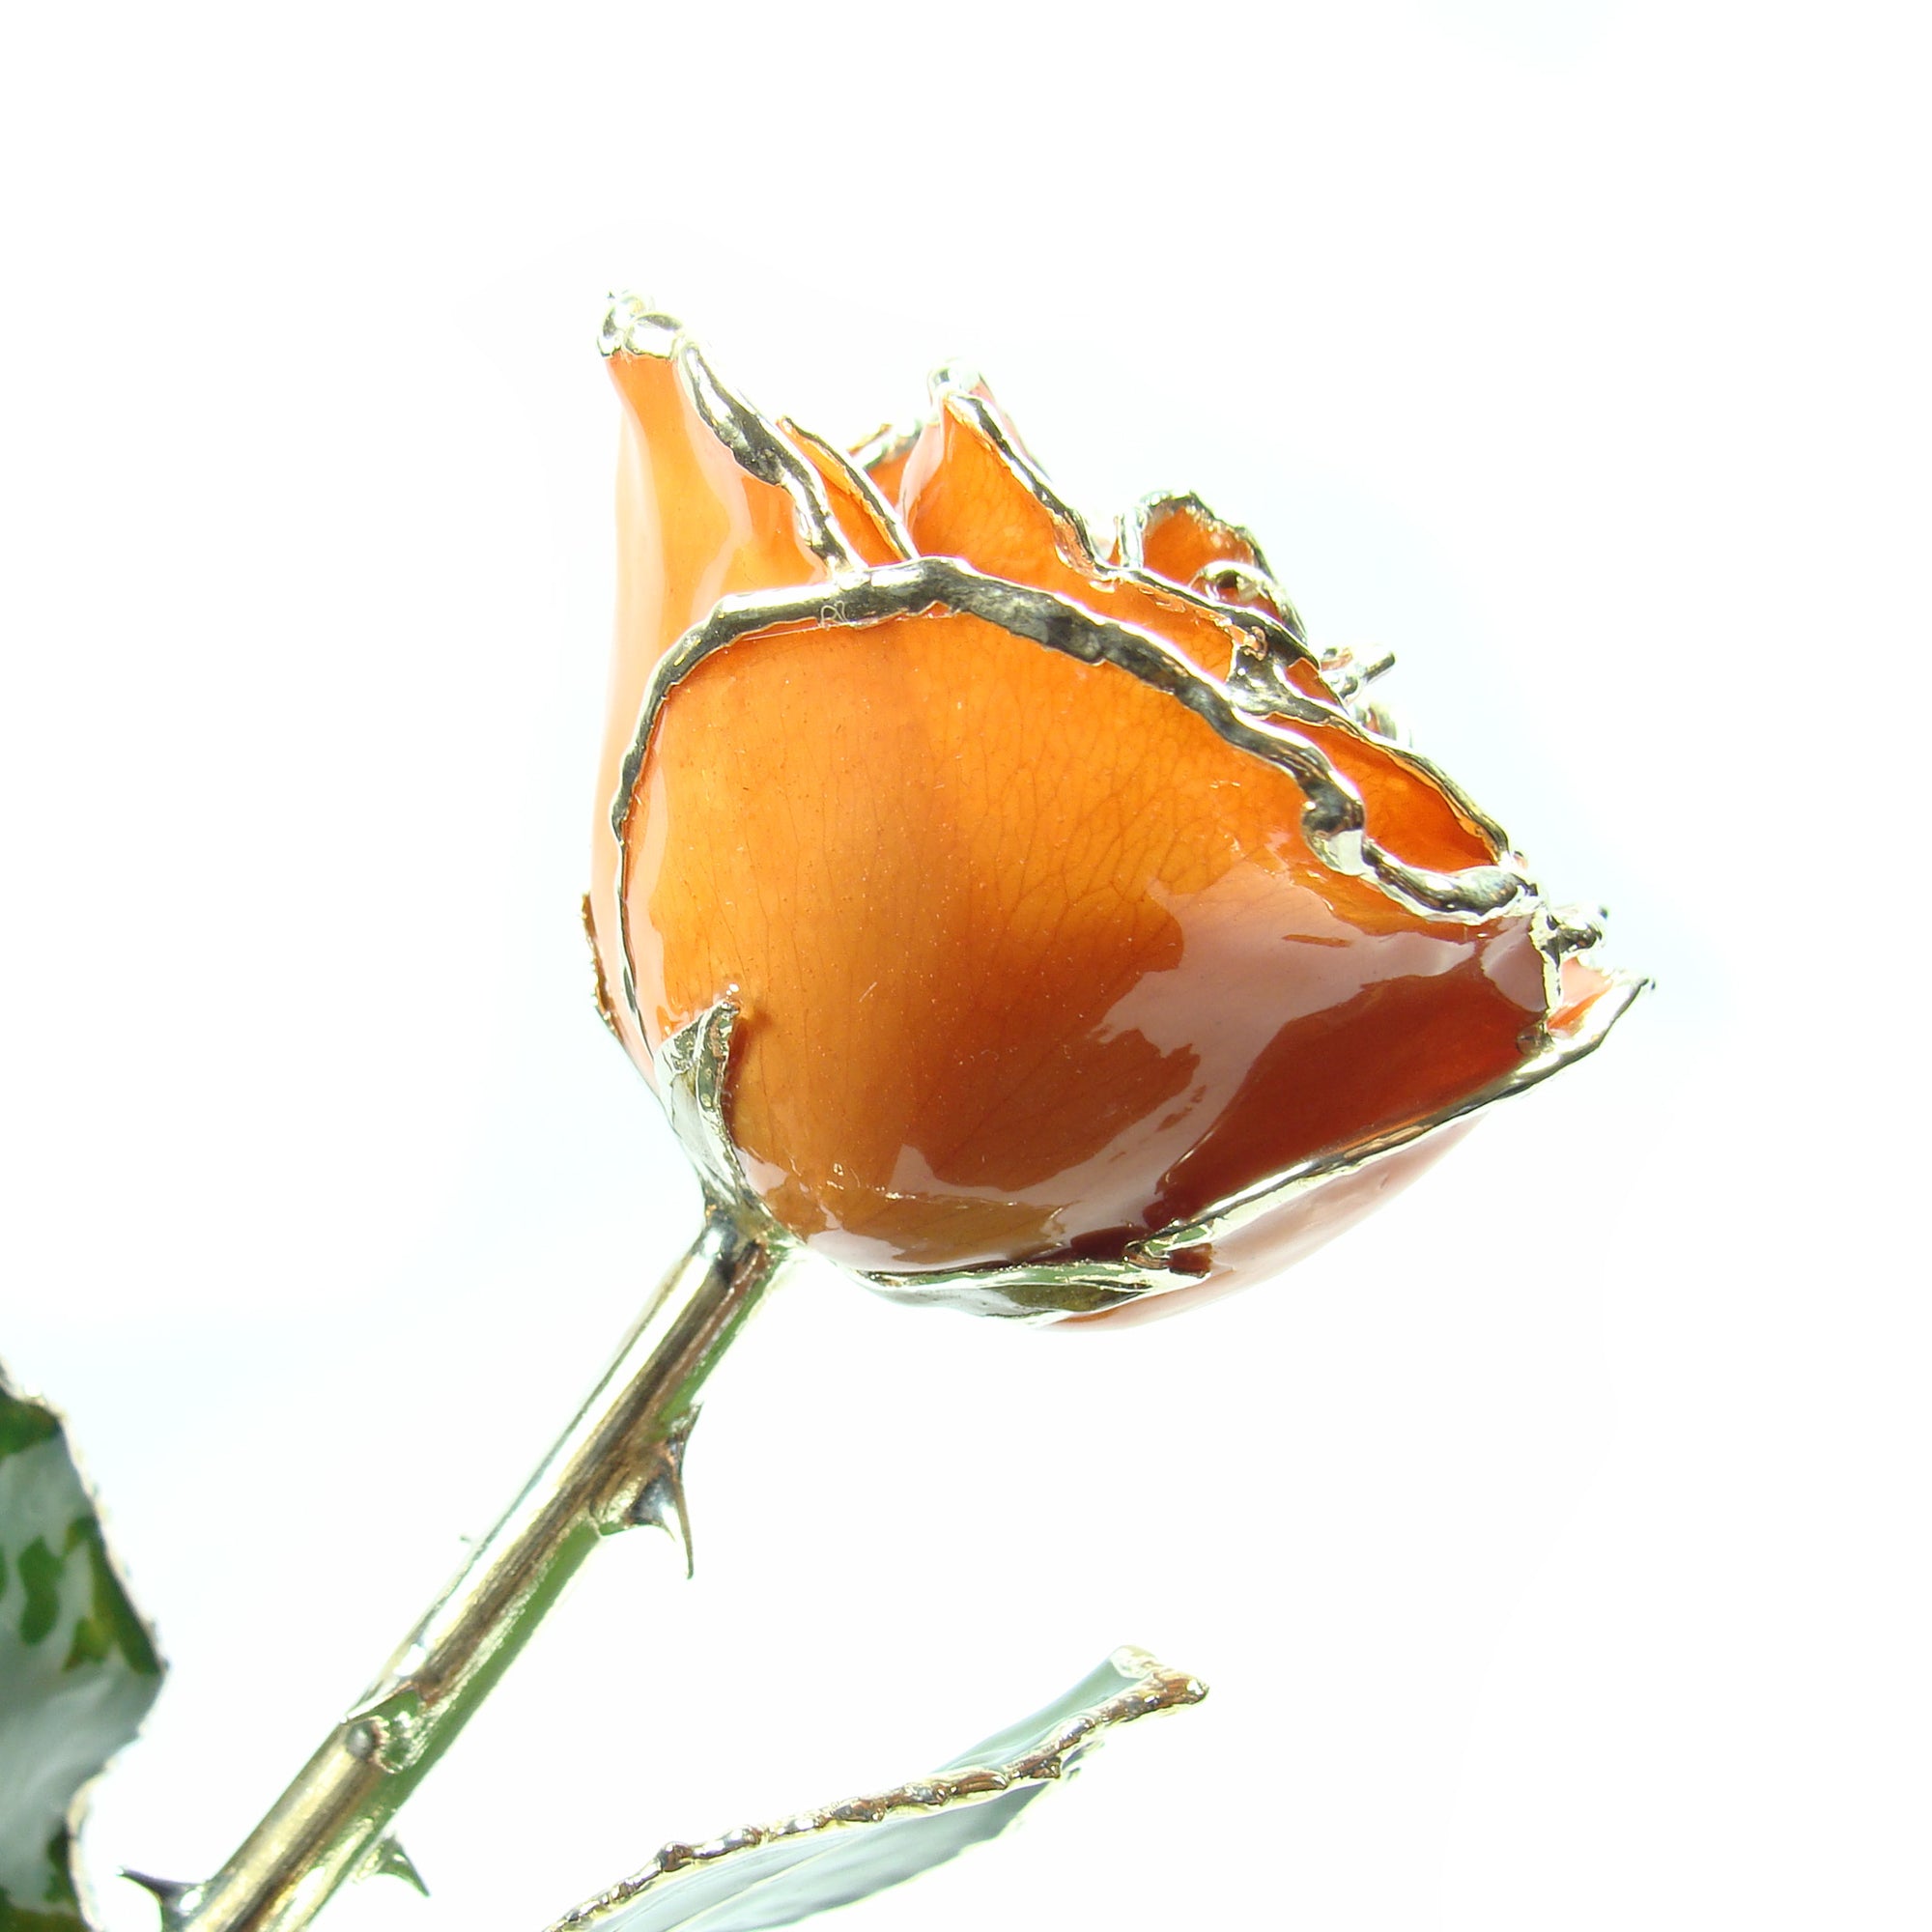 Silver Trimmed Forever Rose with Orange Petals. View of Stem, Leaves, and Rose Petals and Showing Detail of Silver Trim